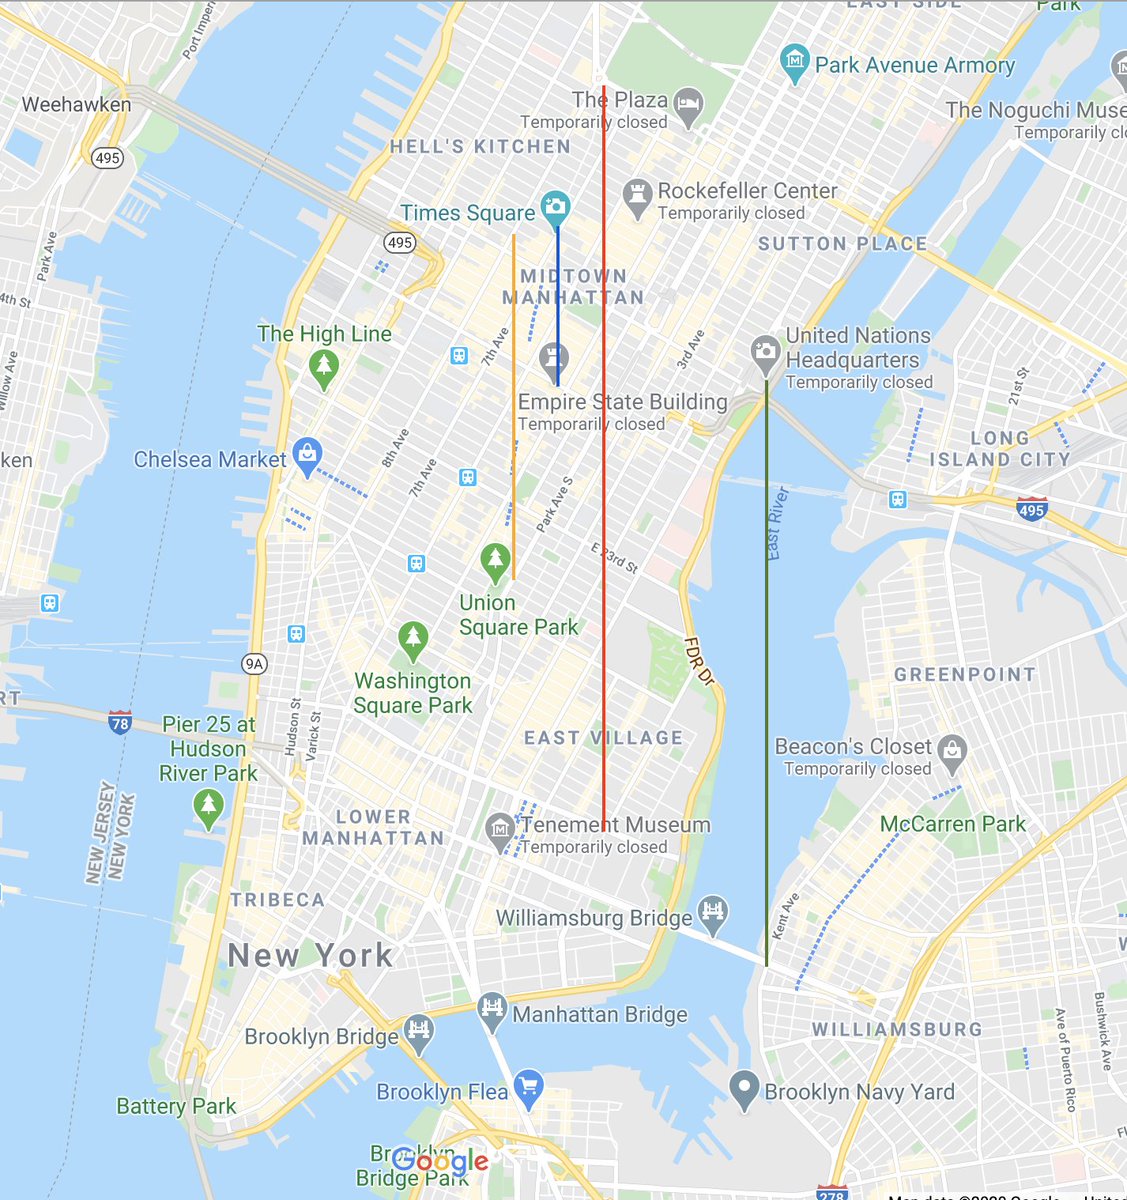 Not to ruin your day but Union Square is further west than the Port Authority Bus Terminal, the Empire State Building is directly south of Times Square, most of the East Village is further west than Columbus Circle and the whole Williamsburg Bridge is west of the UN HQ.